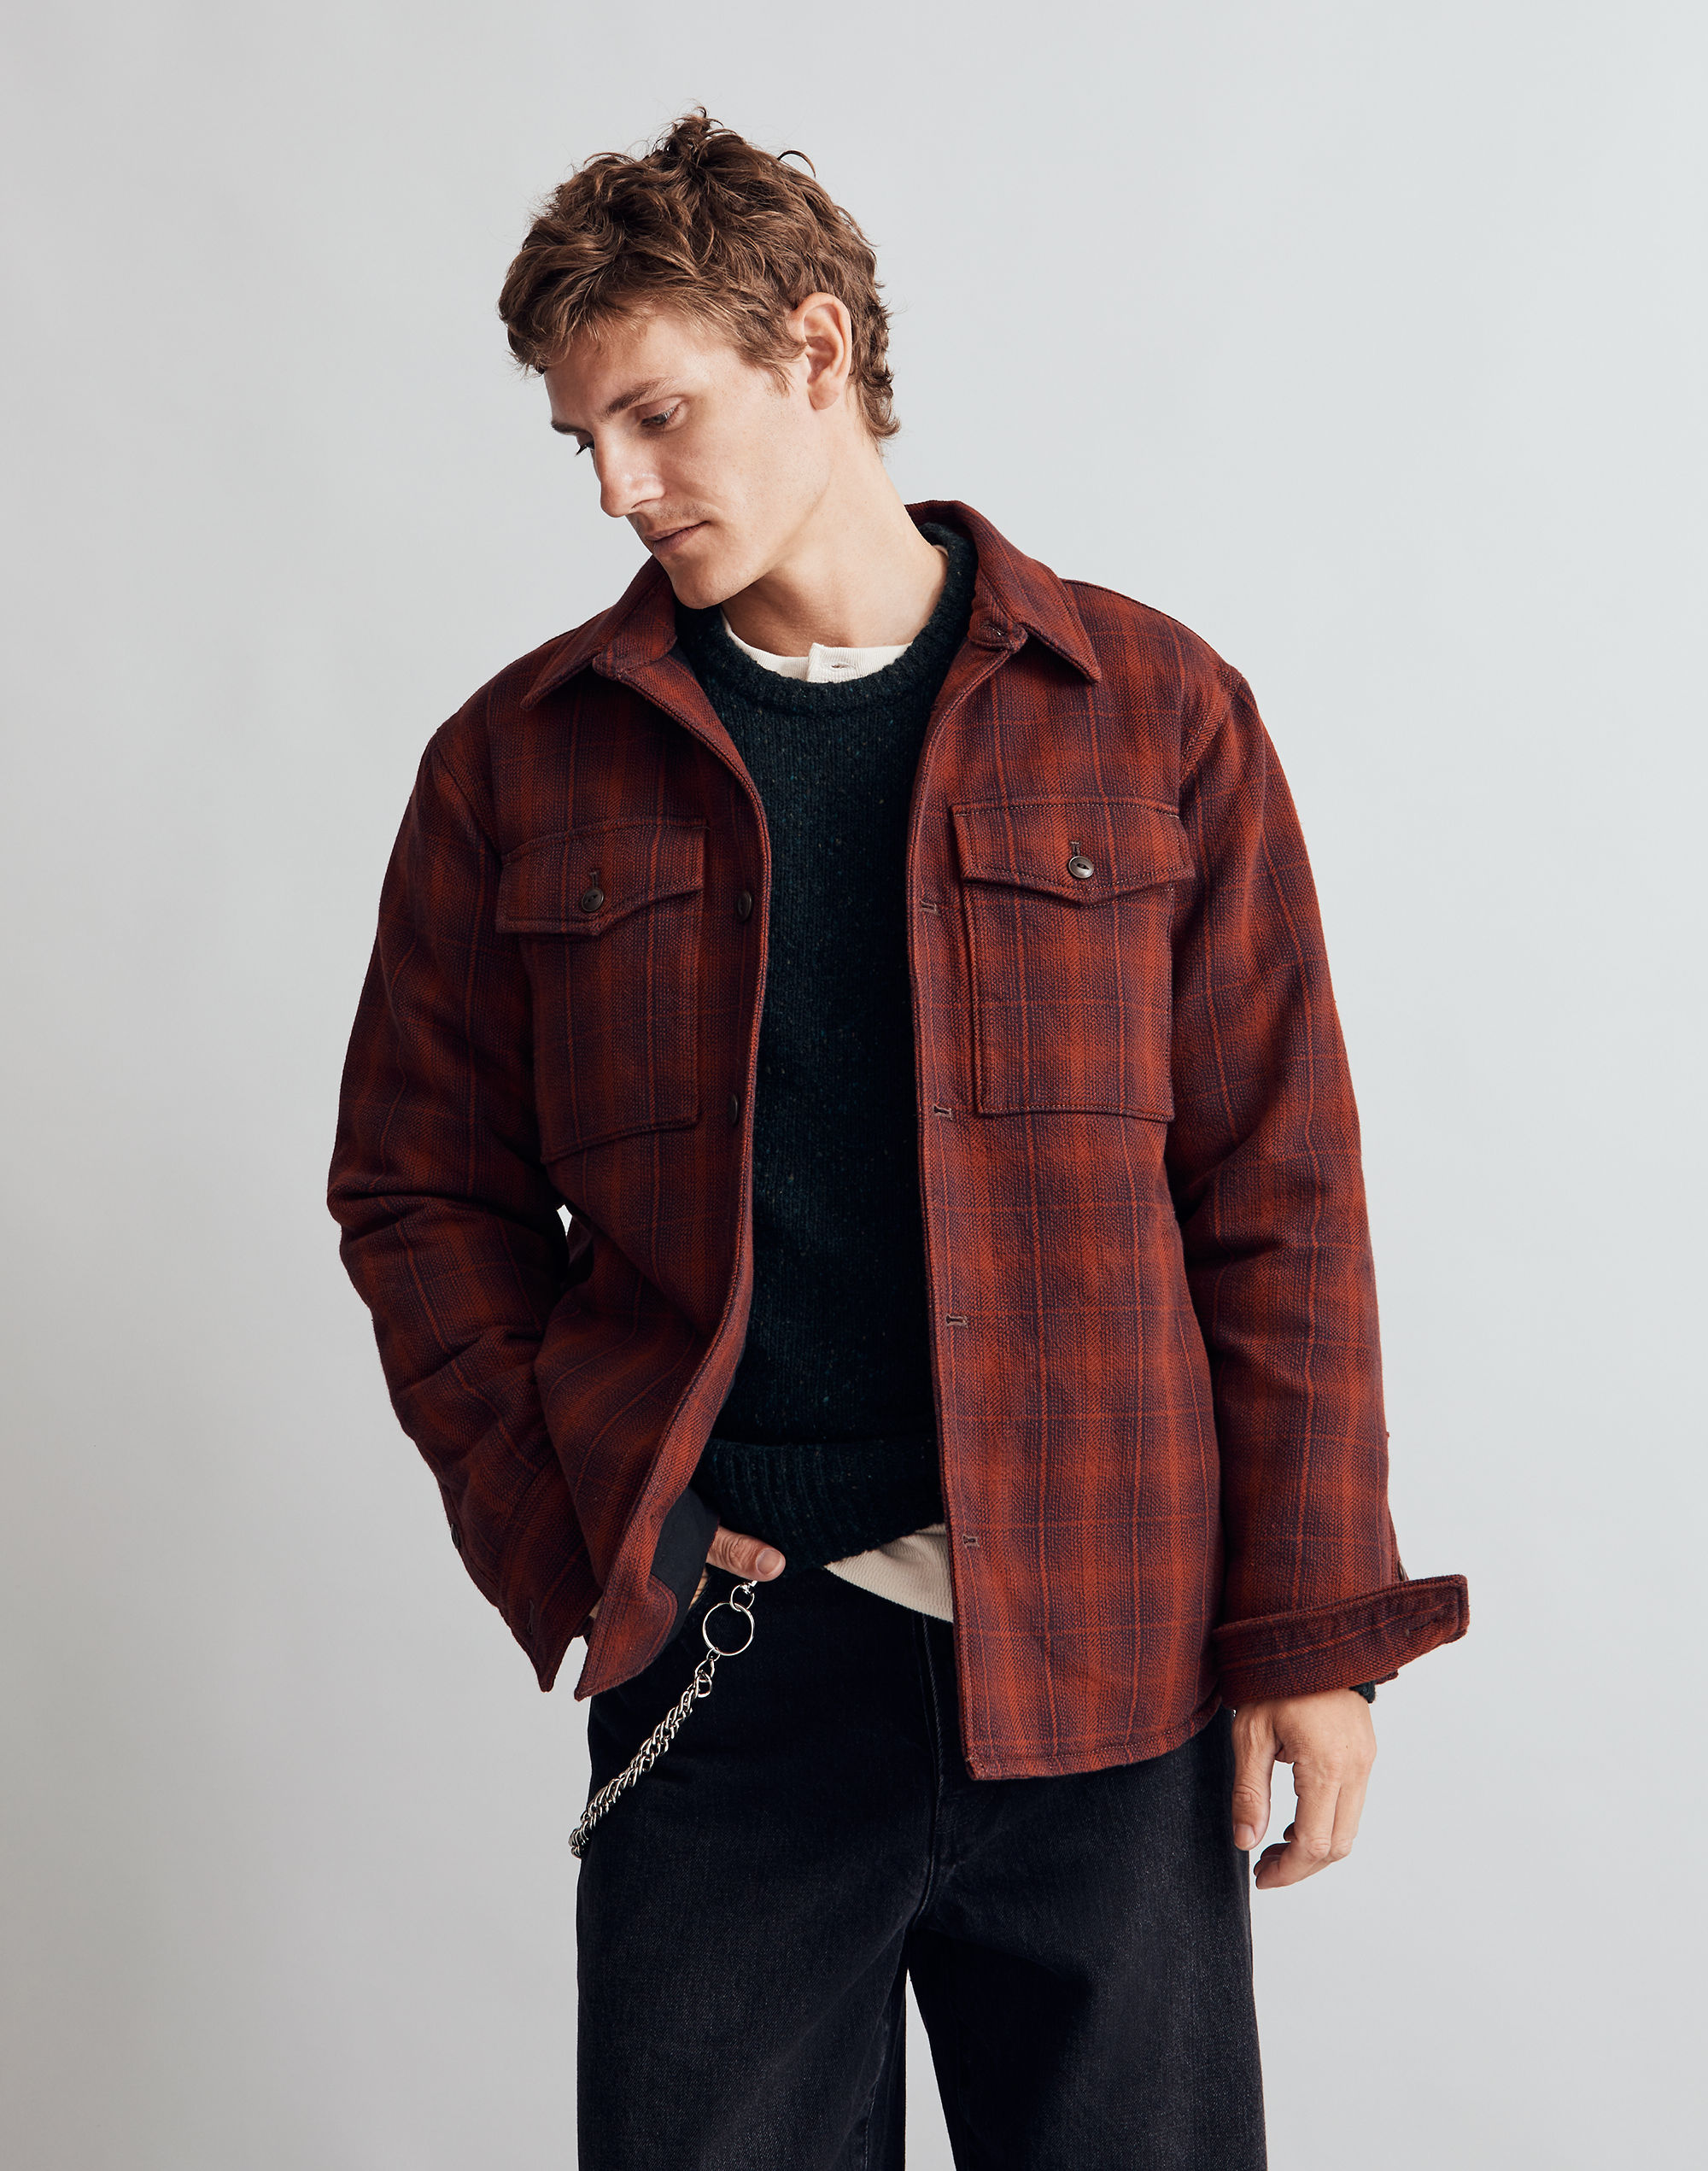 Madewell Men's Quilted Shirt-Jacket in Plaid - Size XS